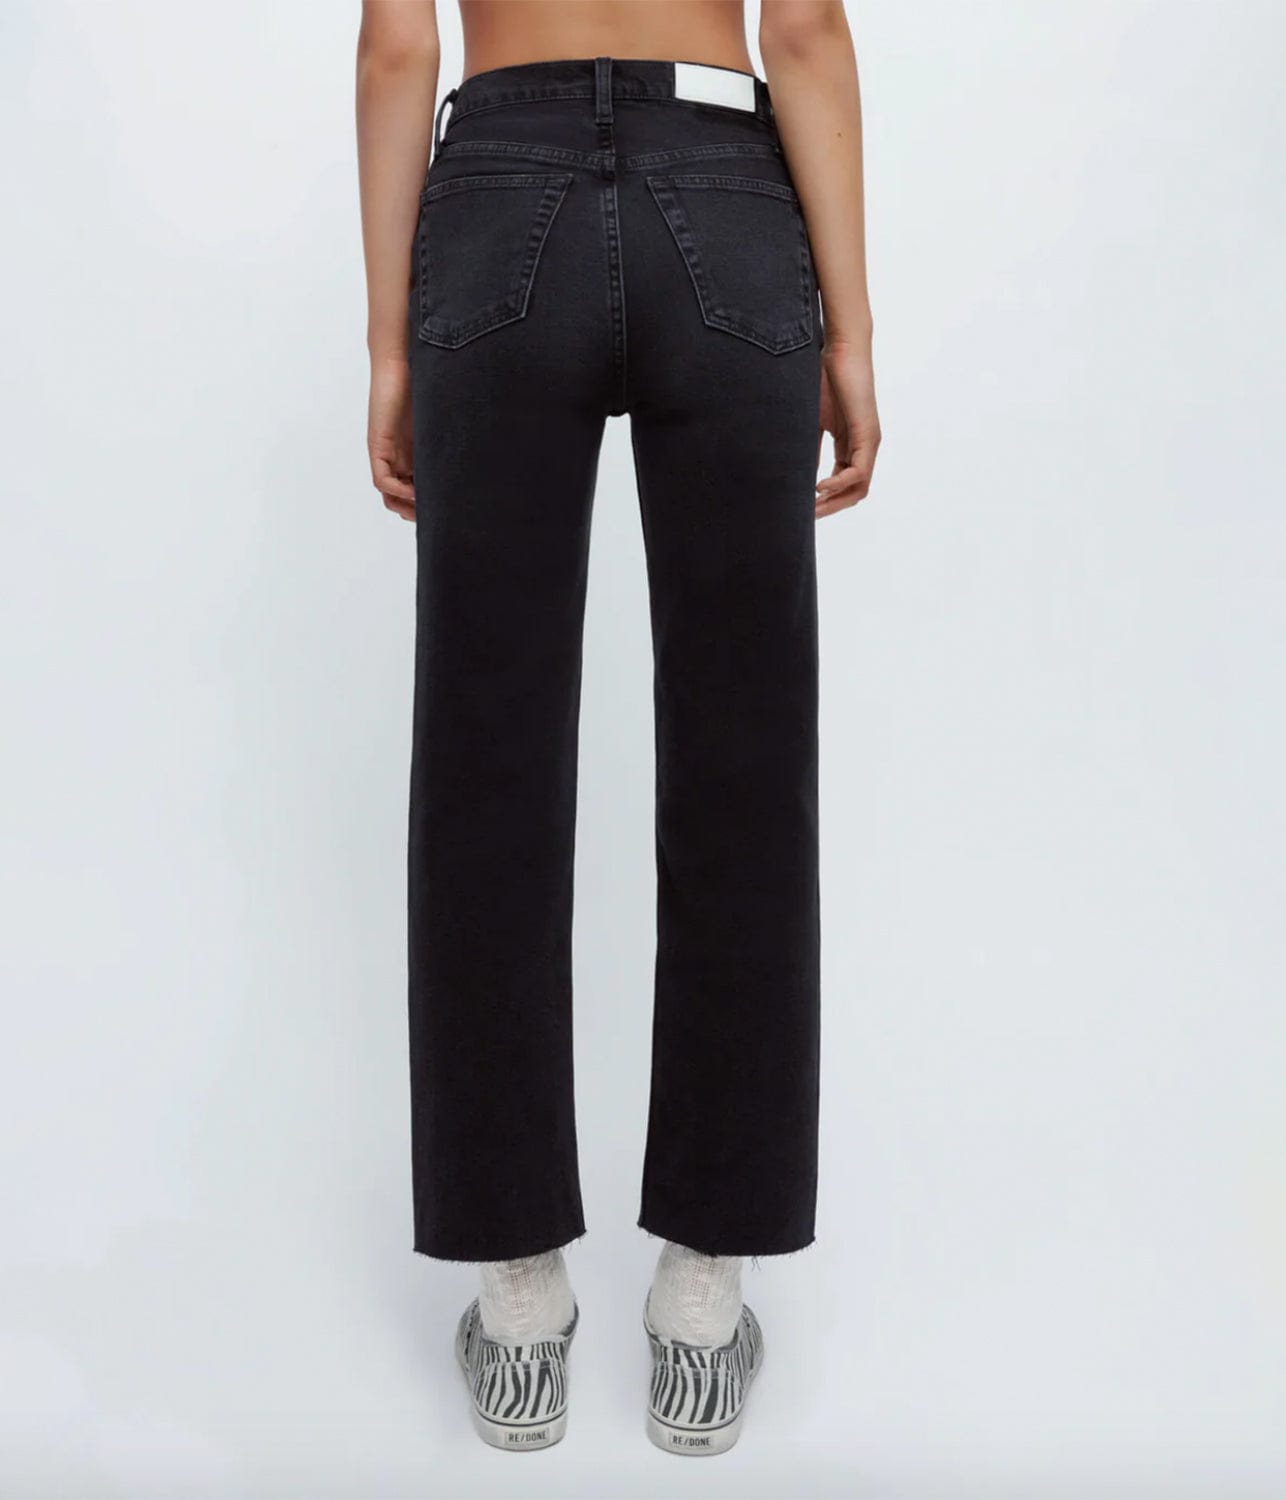 70'S STOVEPIPE JEAN- WASHED NOIR | REDONE | RE/DONE 70'S STOVEPIPE JEAN- WASHED NOIR